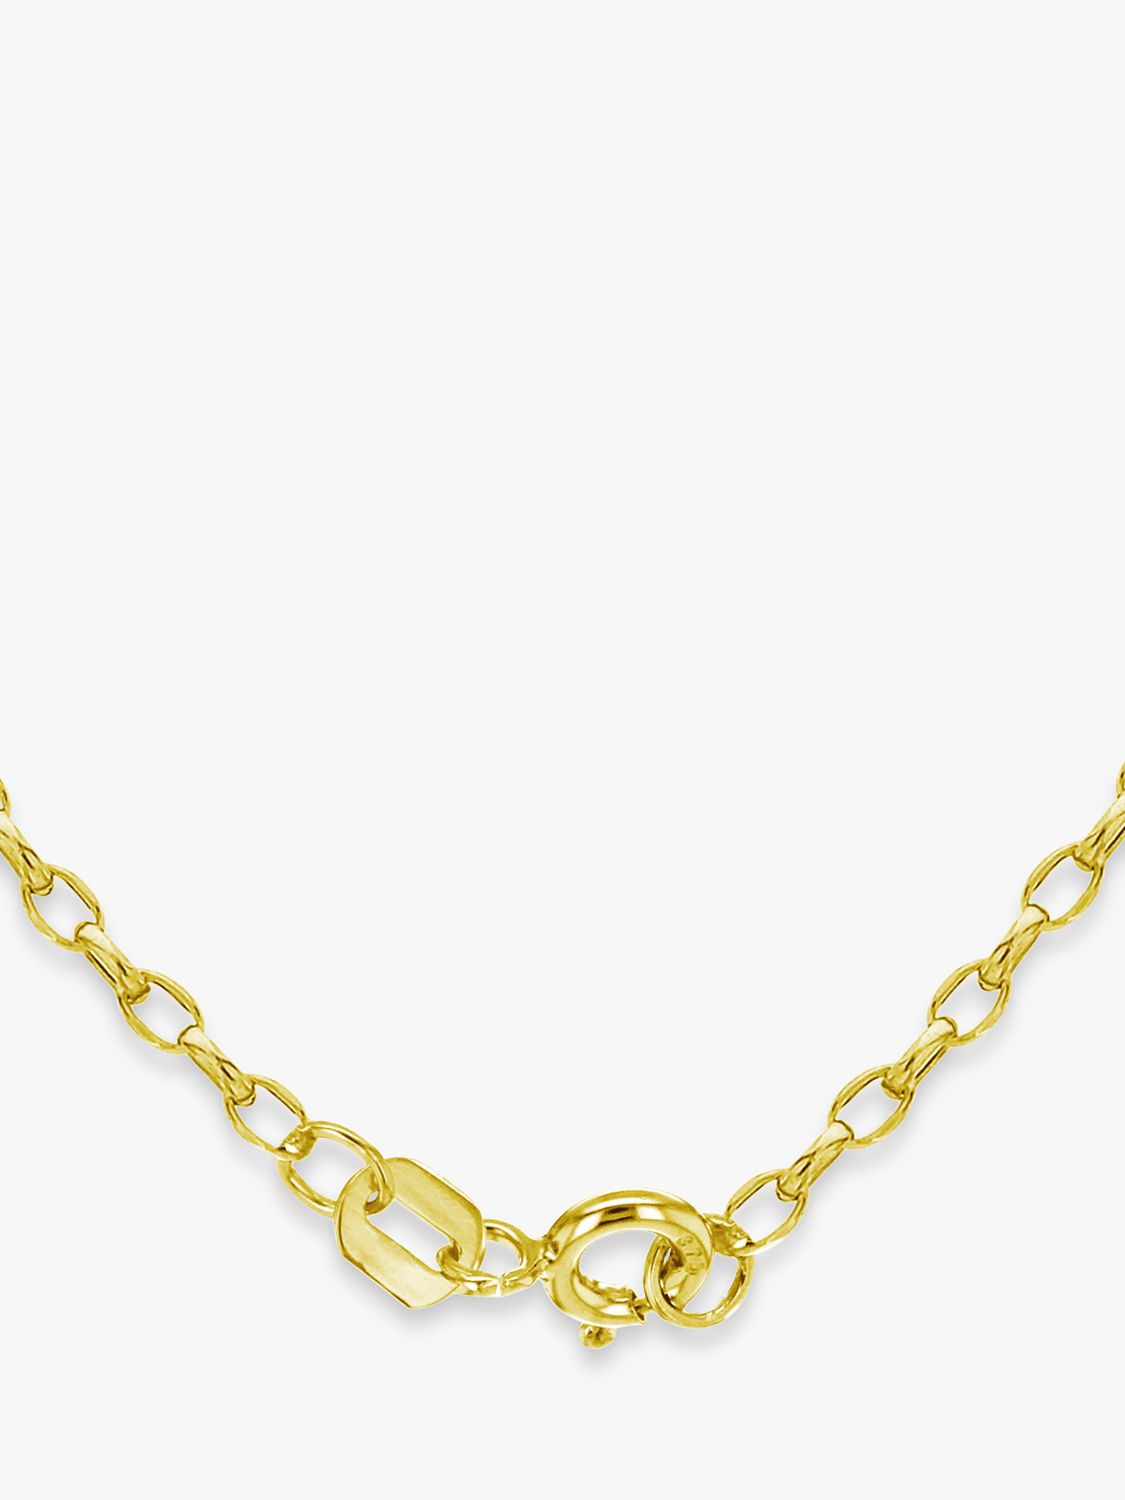 Buy IBB 9ct Yellow Gold Long Hollow Oval Link Chain Necklace, Gold Online at johnlewis.com